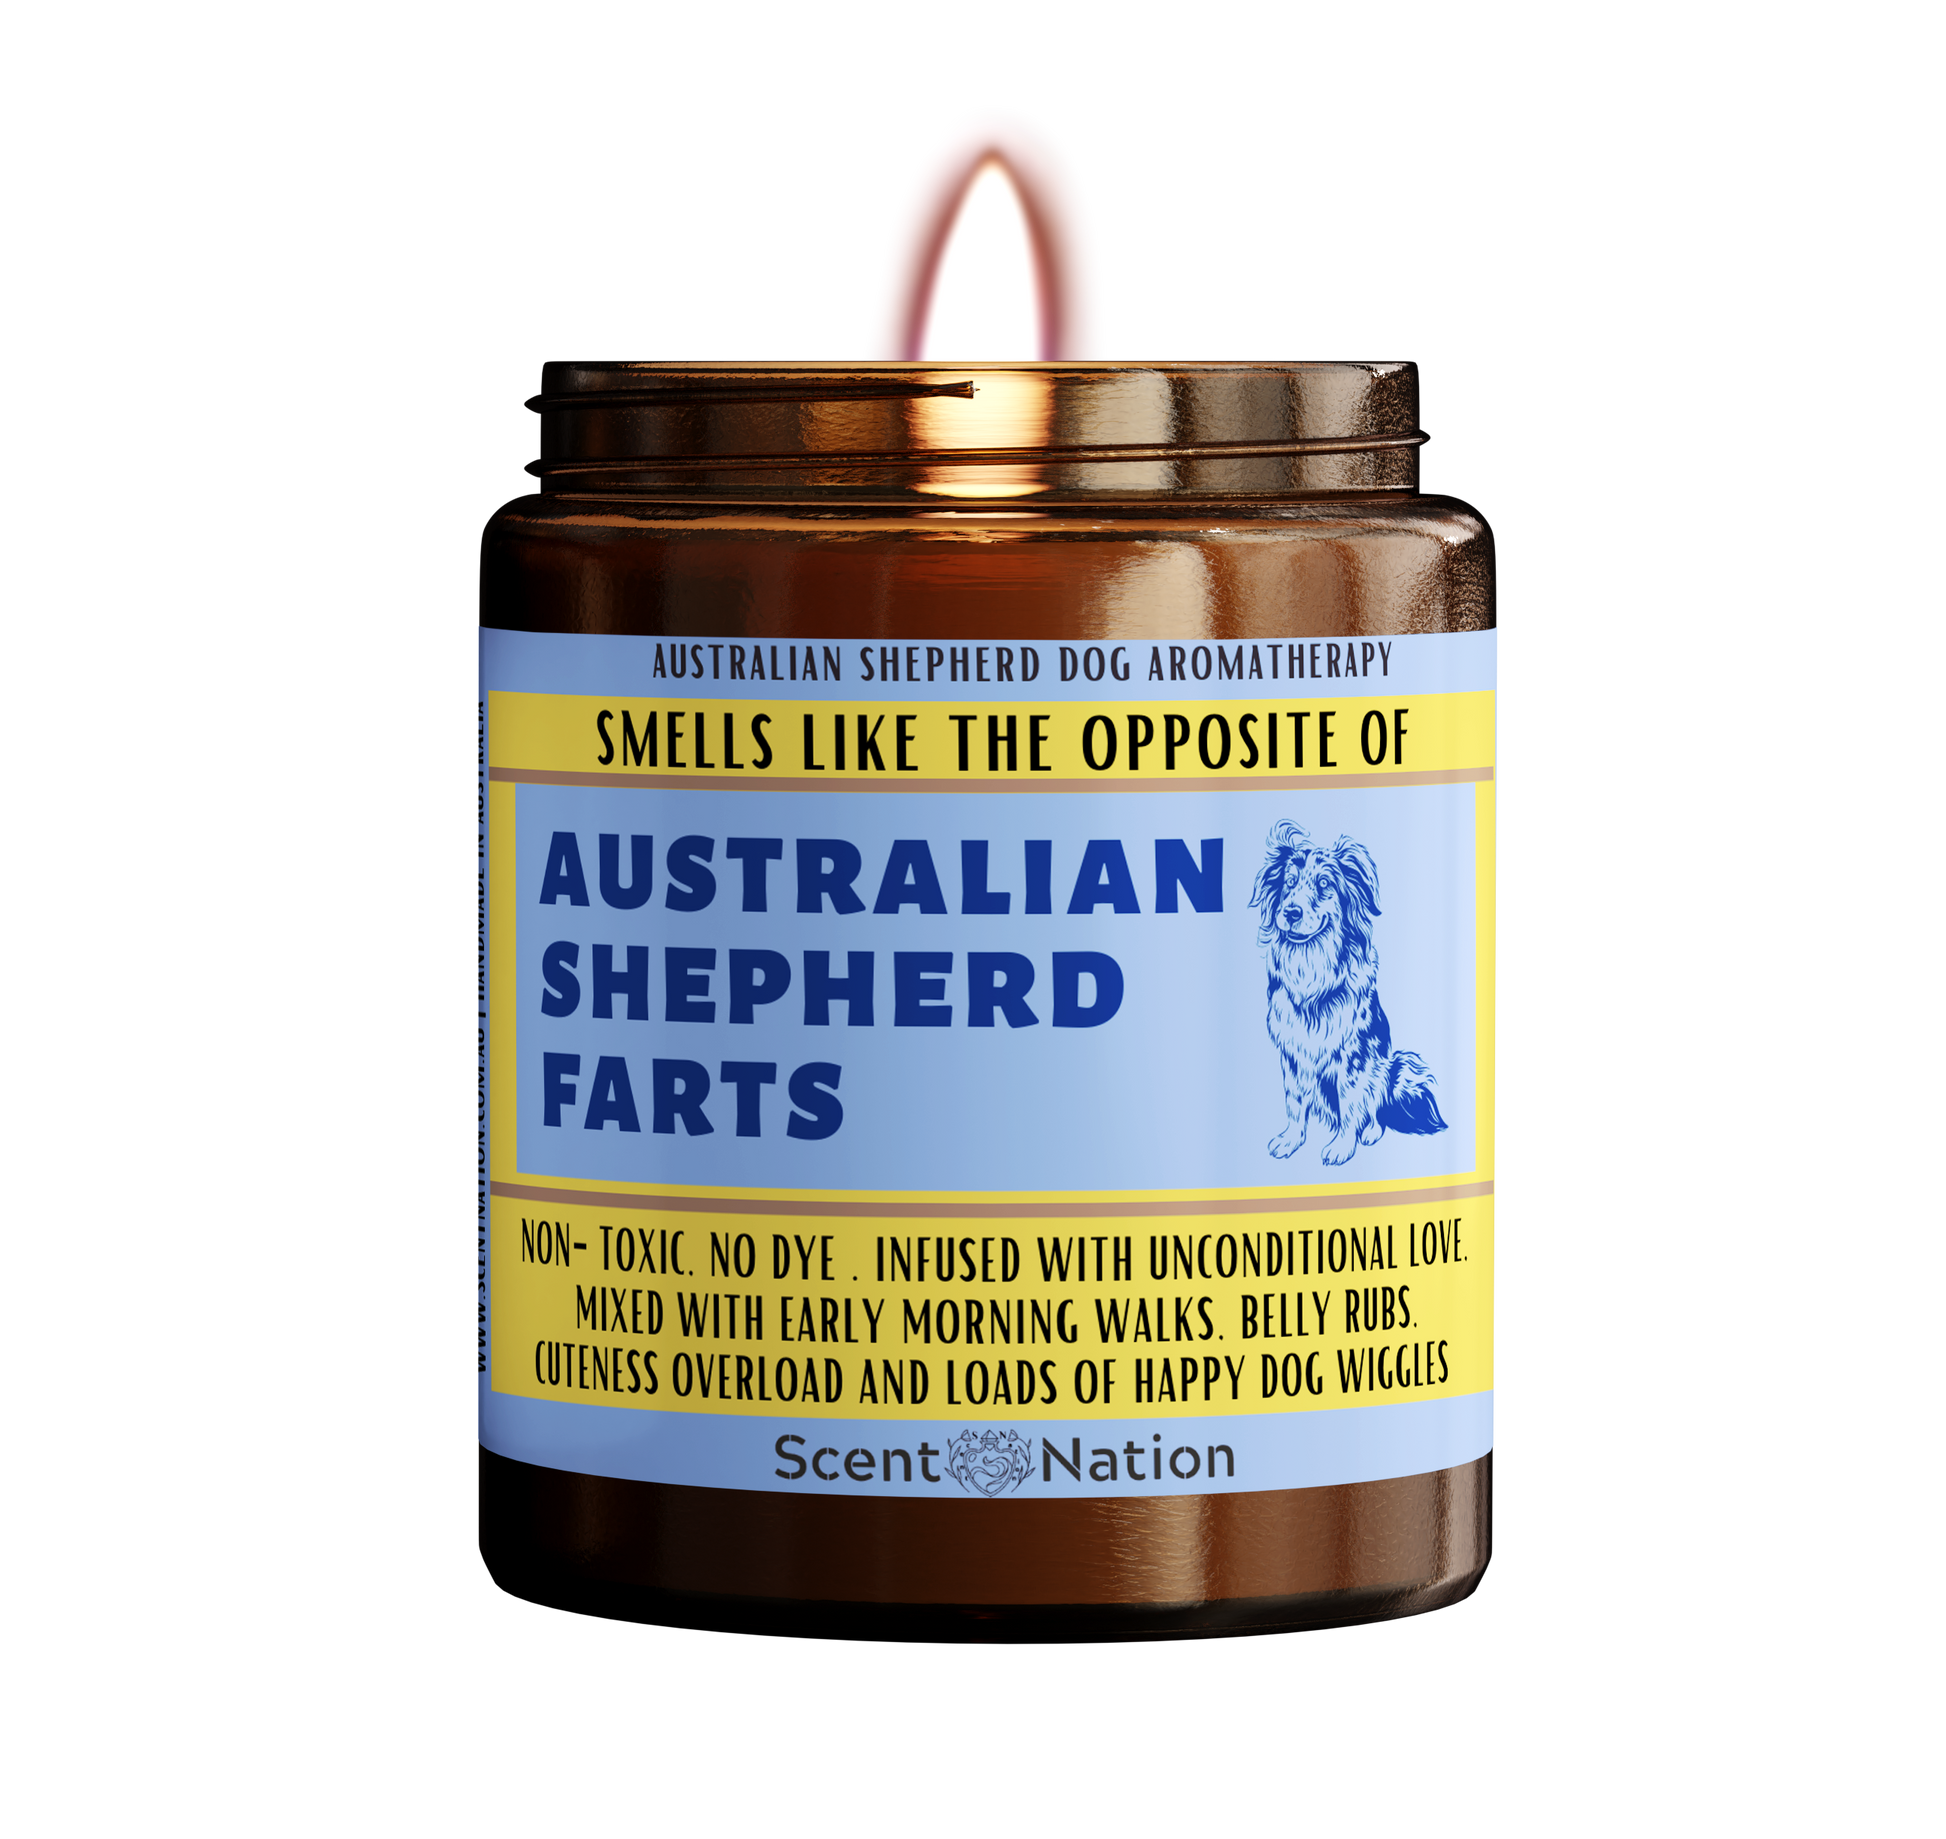 An Australian Shepherd dog puppy on a candle labeled "Smells like the opposite of an Australian Shepherd farts". The candle is made in Australia and is a great gift for Australian Shepherd lovers, new Australian Shepherd owners, or anyone who appreciates a dog candle that doubles as a fart extinguisher..